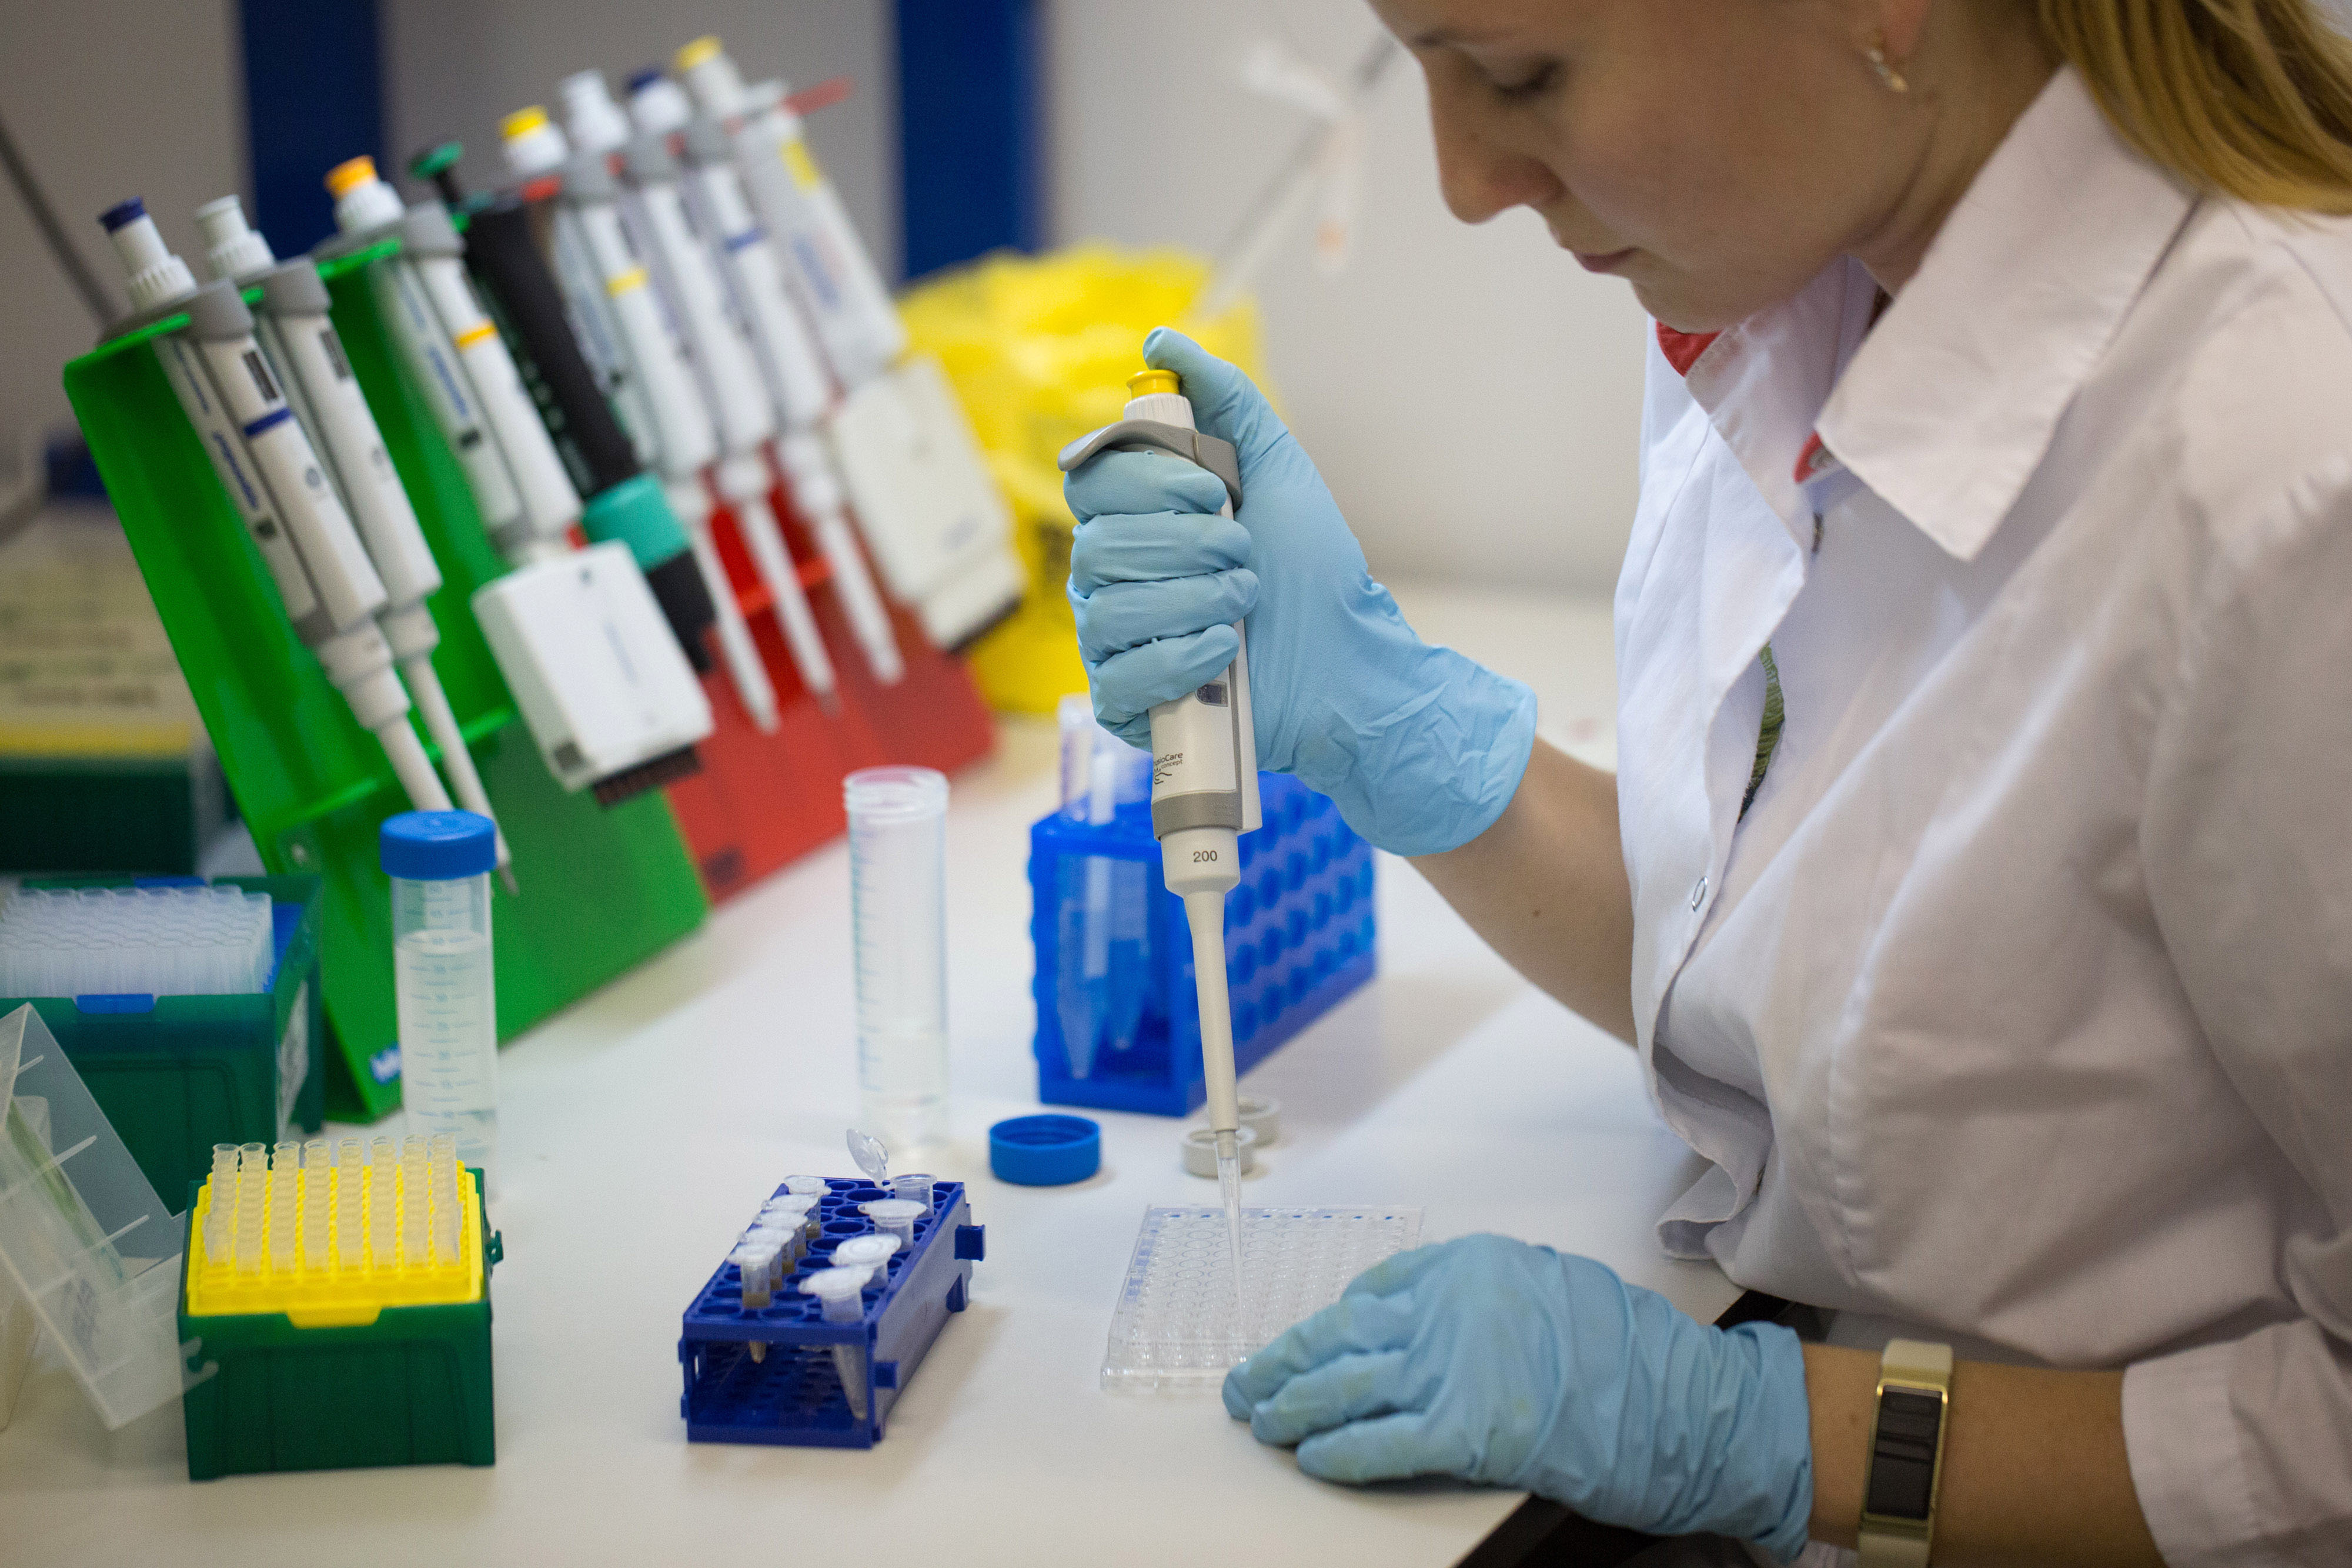 A lab technician in Moscow works on August 6 during production of a Covid-19 vaccine. The vaccine is developed by the Gamaleya National Research Center for Epidemiology and Microbiology and the Russian Direct Investment Fund (RDIF).